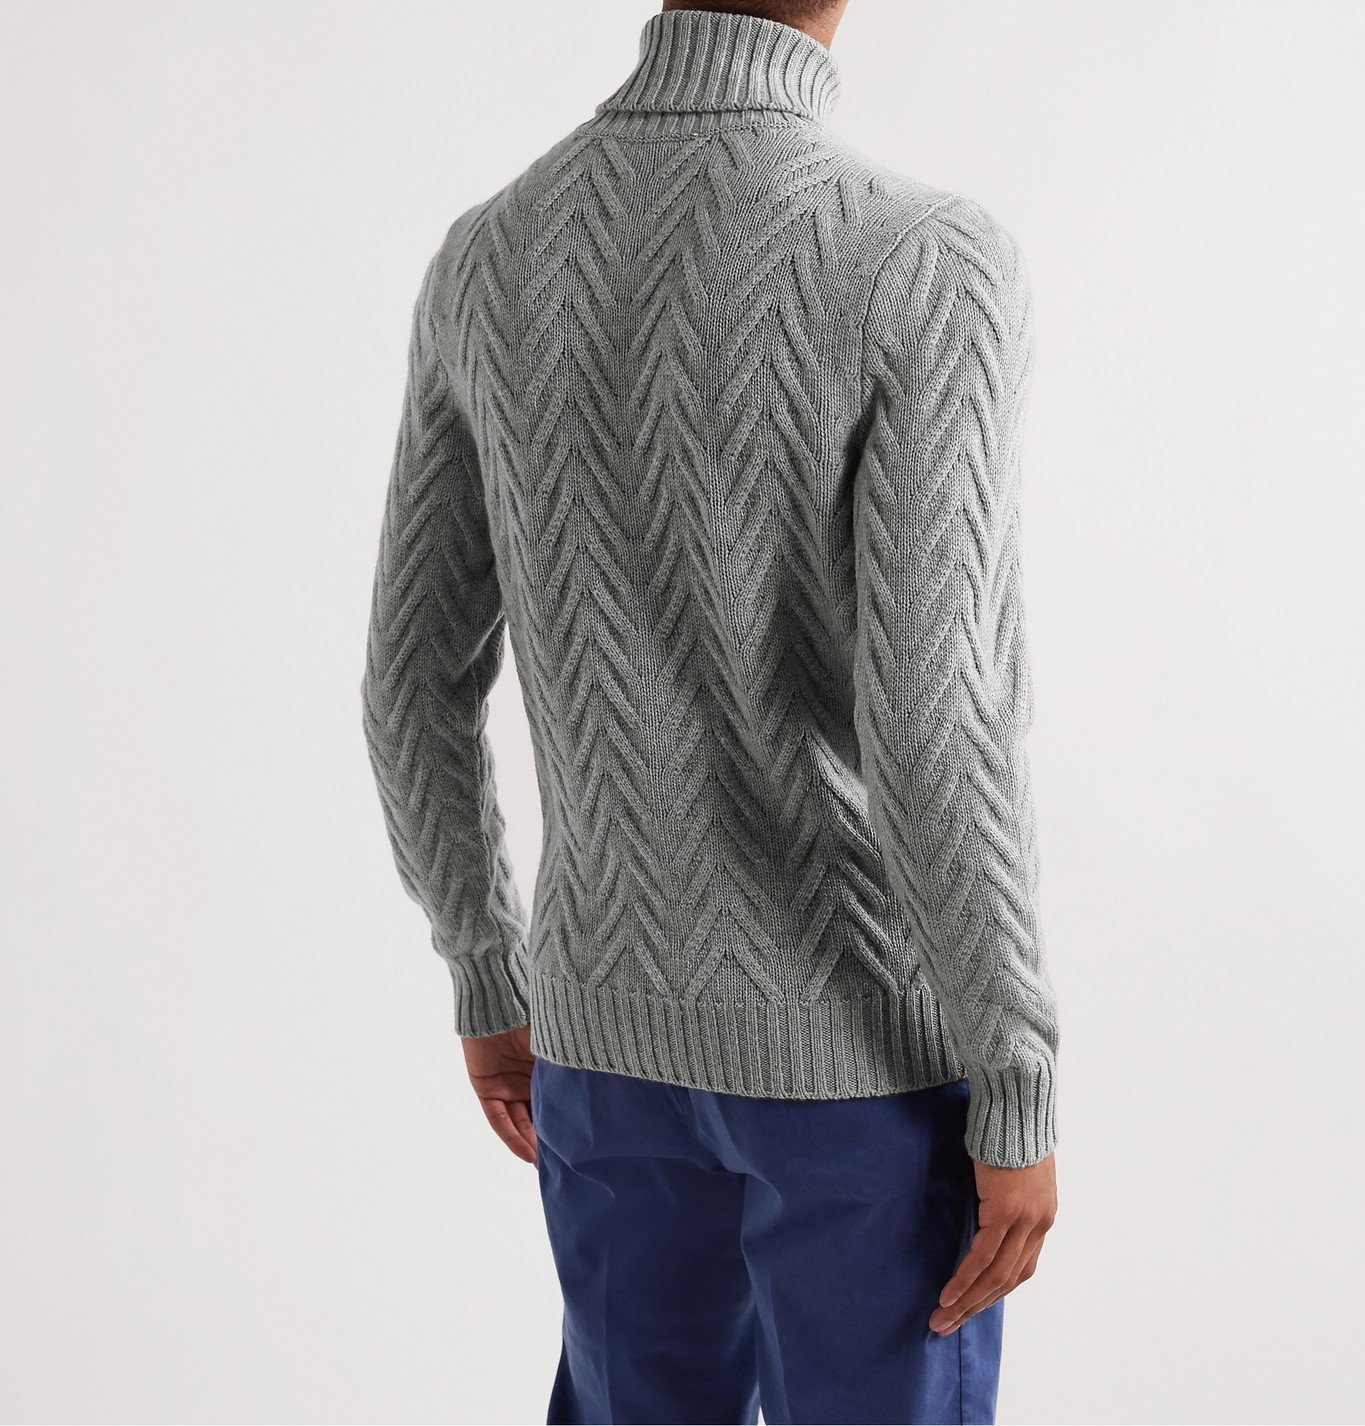 Kiton - Slim-Fit Cable-Knit Cashmere Rollneck Sweater - Gray Kiton